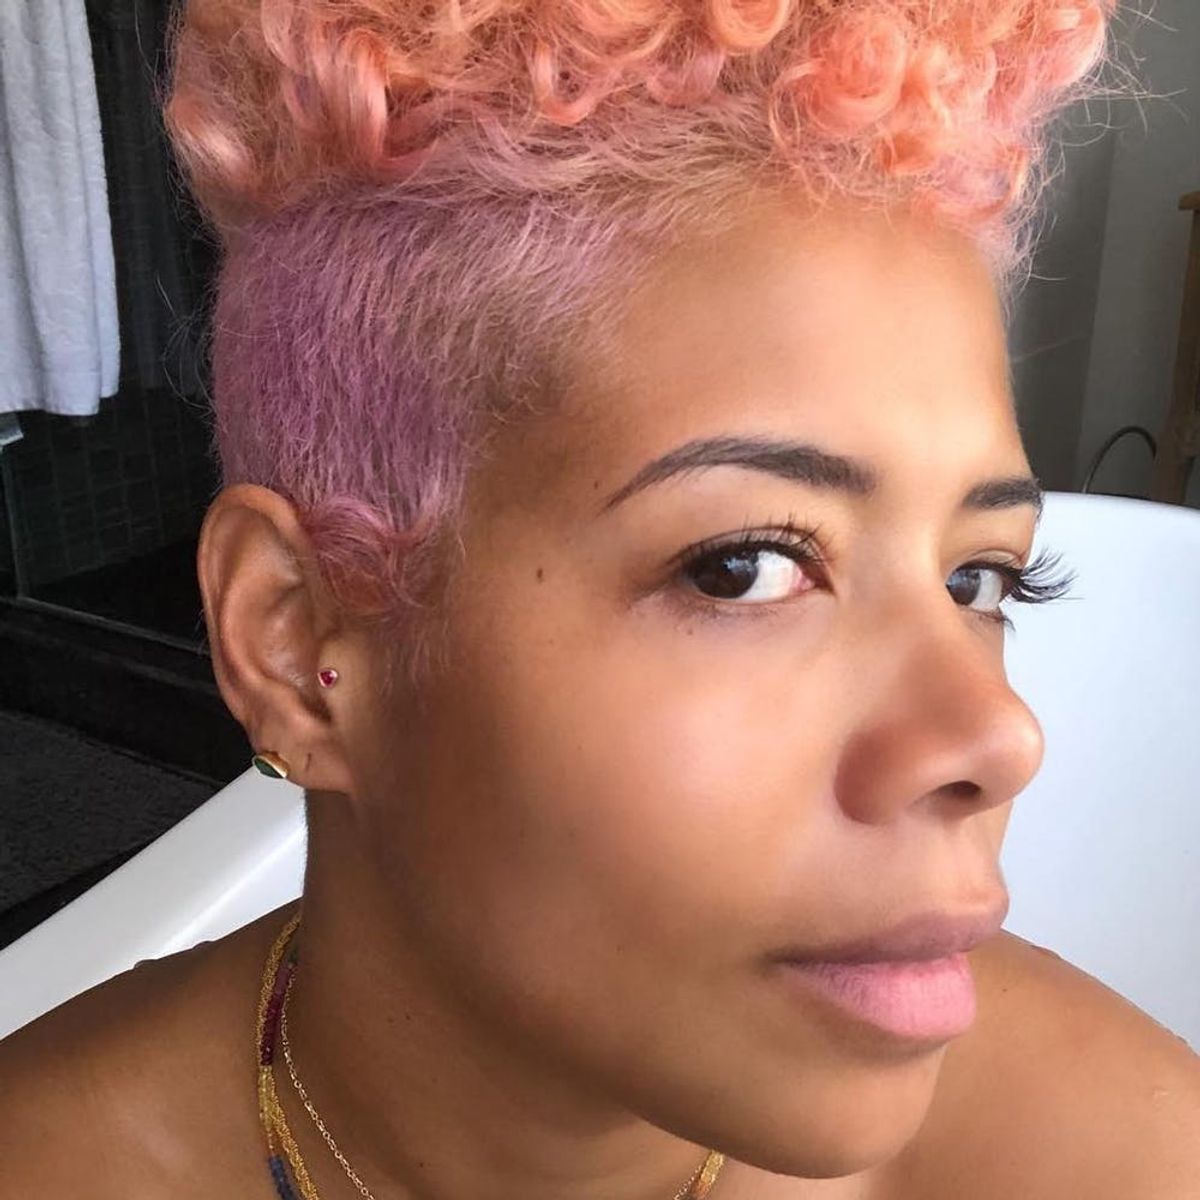 Tequila Sunrise Hair Color May Be Spring’s Most Fun Beauty Trend